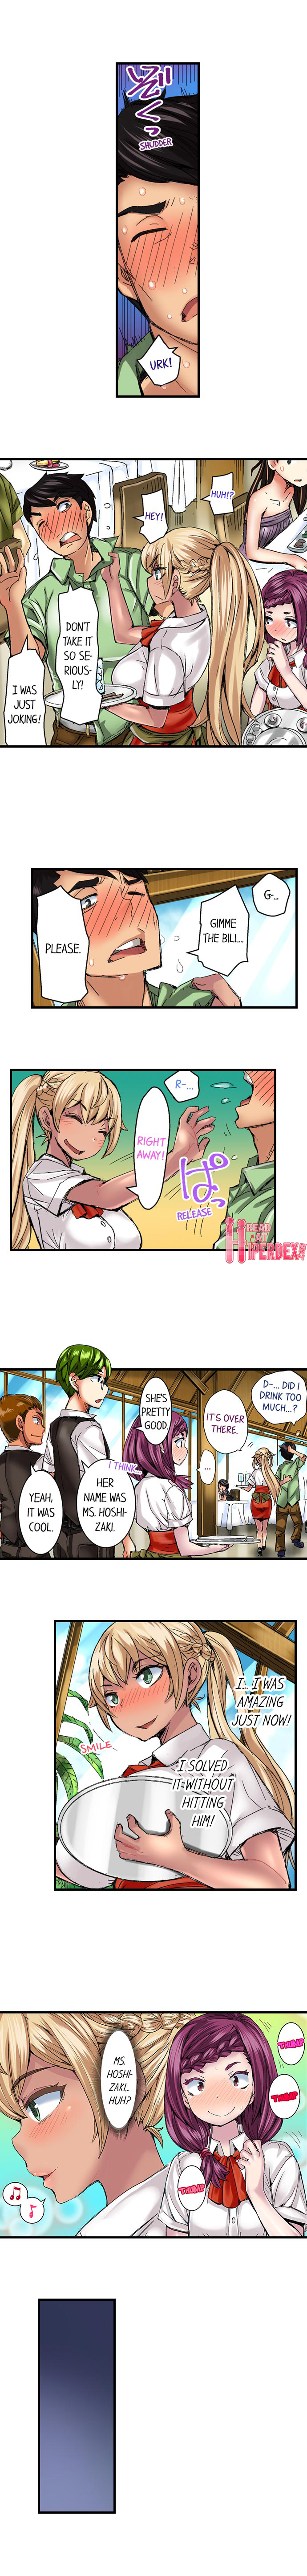 Taking a Hot Tanned Chick’s Virginity - Chapter 23 Page 4